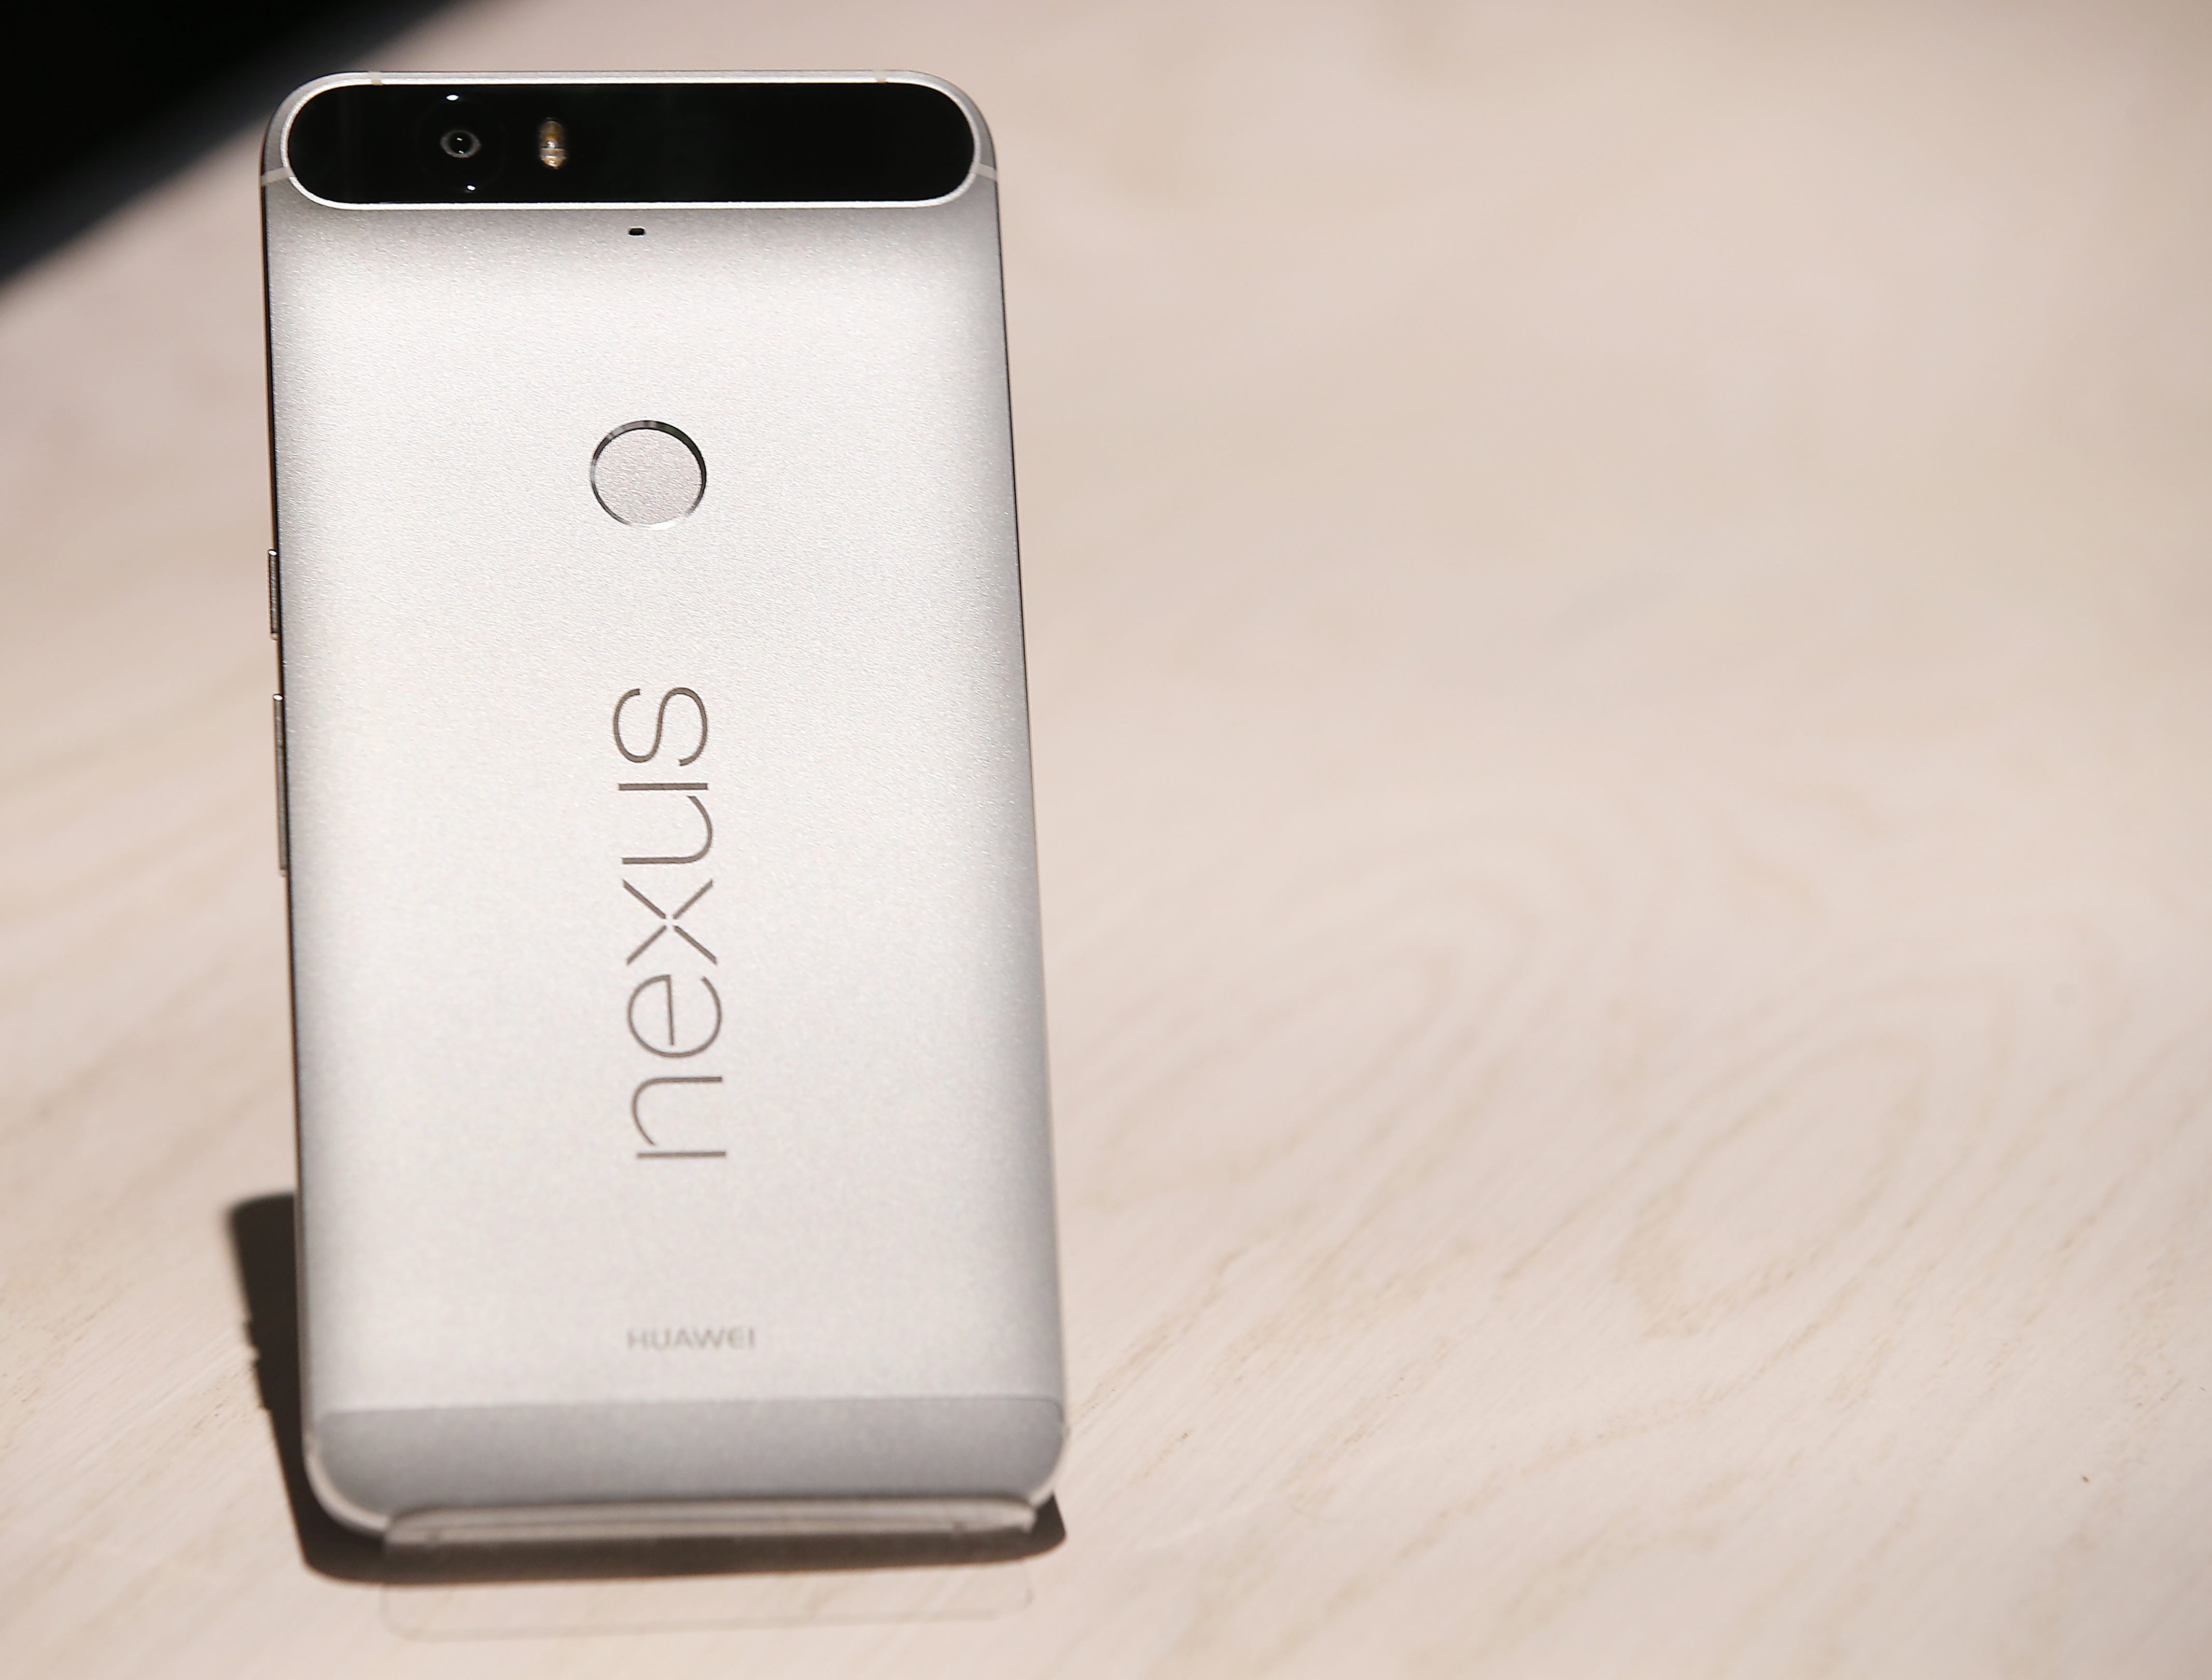 The new Google Nexus 6P is on display during a Google event Tuesday in San Francisco.